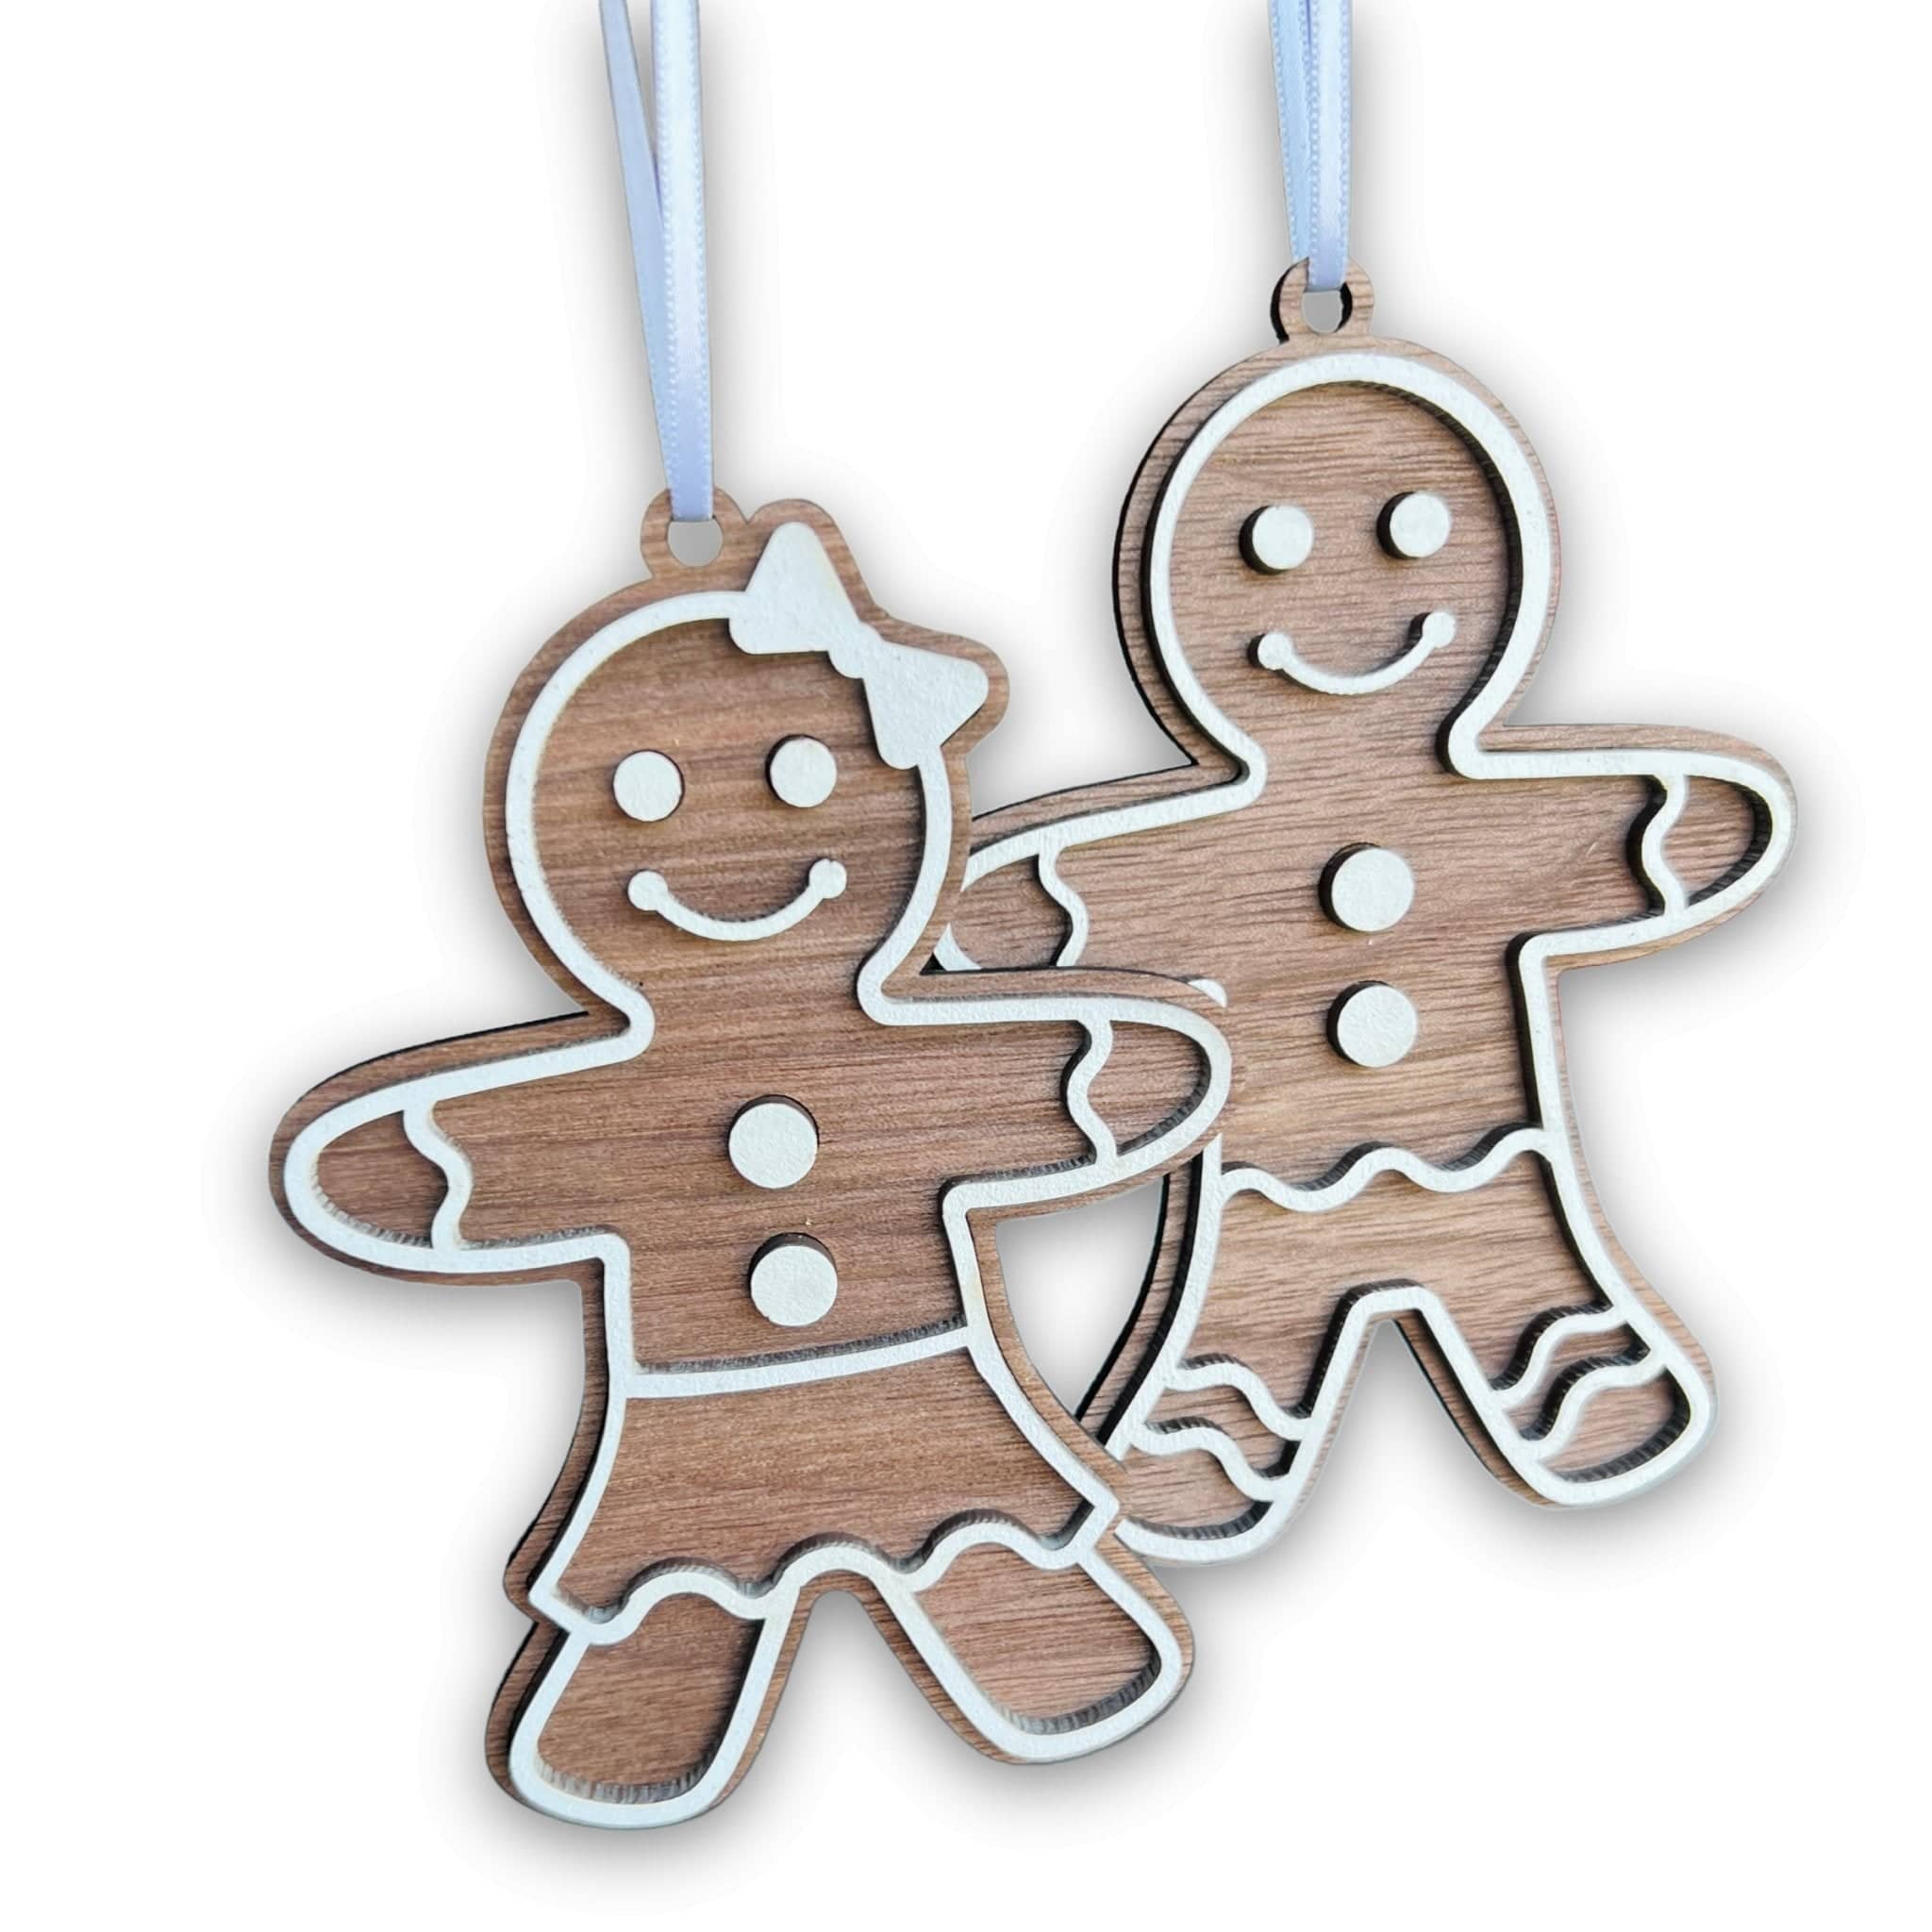 The Cutest Gingerbread People Ornaments - Sticks & Doodles